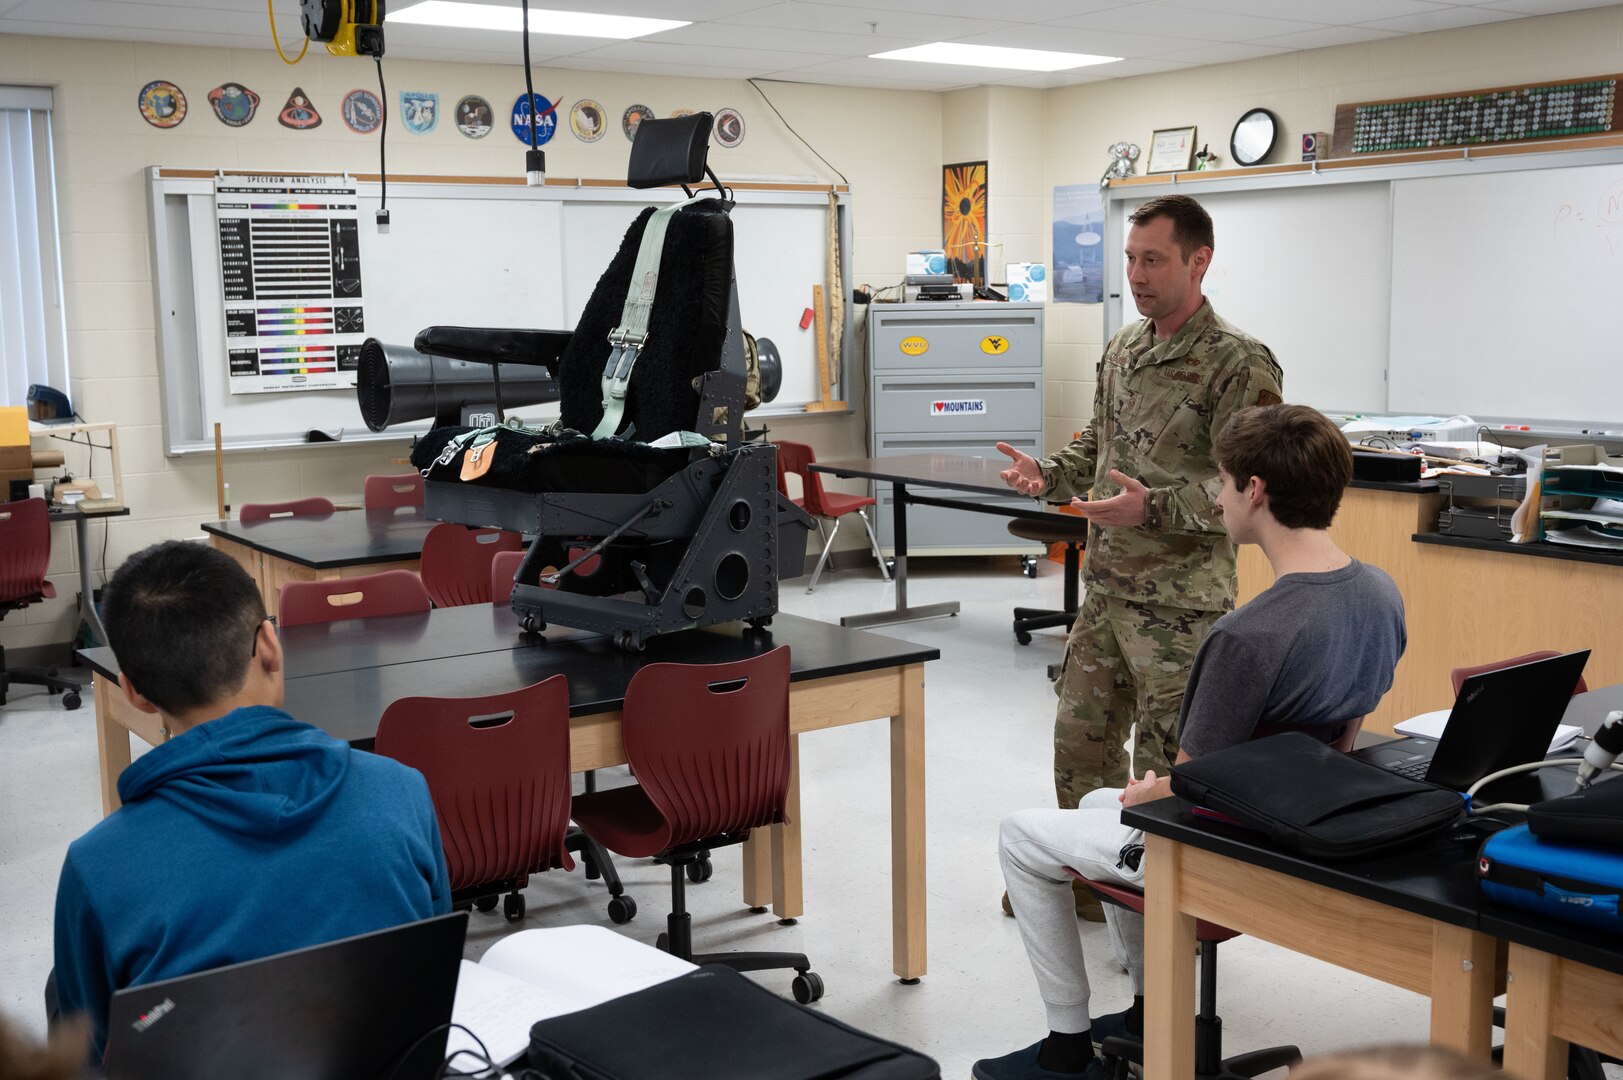 Master Sgt. Jeffery Jackson, a First Sergeant, assigned to the 130th Maintenance Squadron explains the function of a C-130 E model aircraft seat to a group of High School students at Hurricane Hight School in Hurricane, West Virginia, April 26, 2022. The Aircraft seat was donated to the aerospace engineering students as an example of an aircraft seat designed for extended flight hours. (U.S. Air National Guard photo by Senior Master Sgt. Eugene Crist)